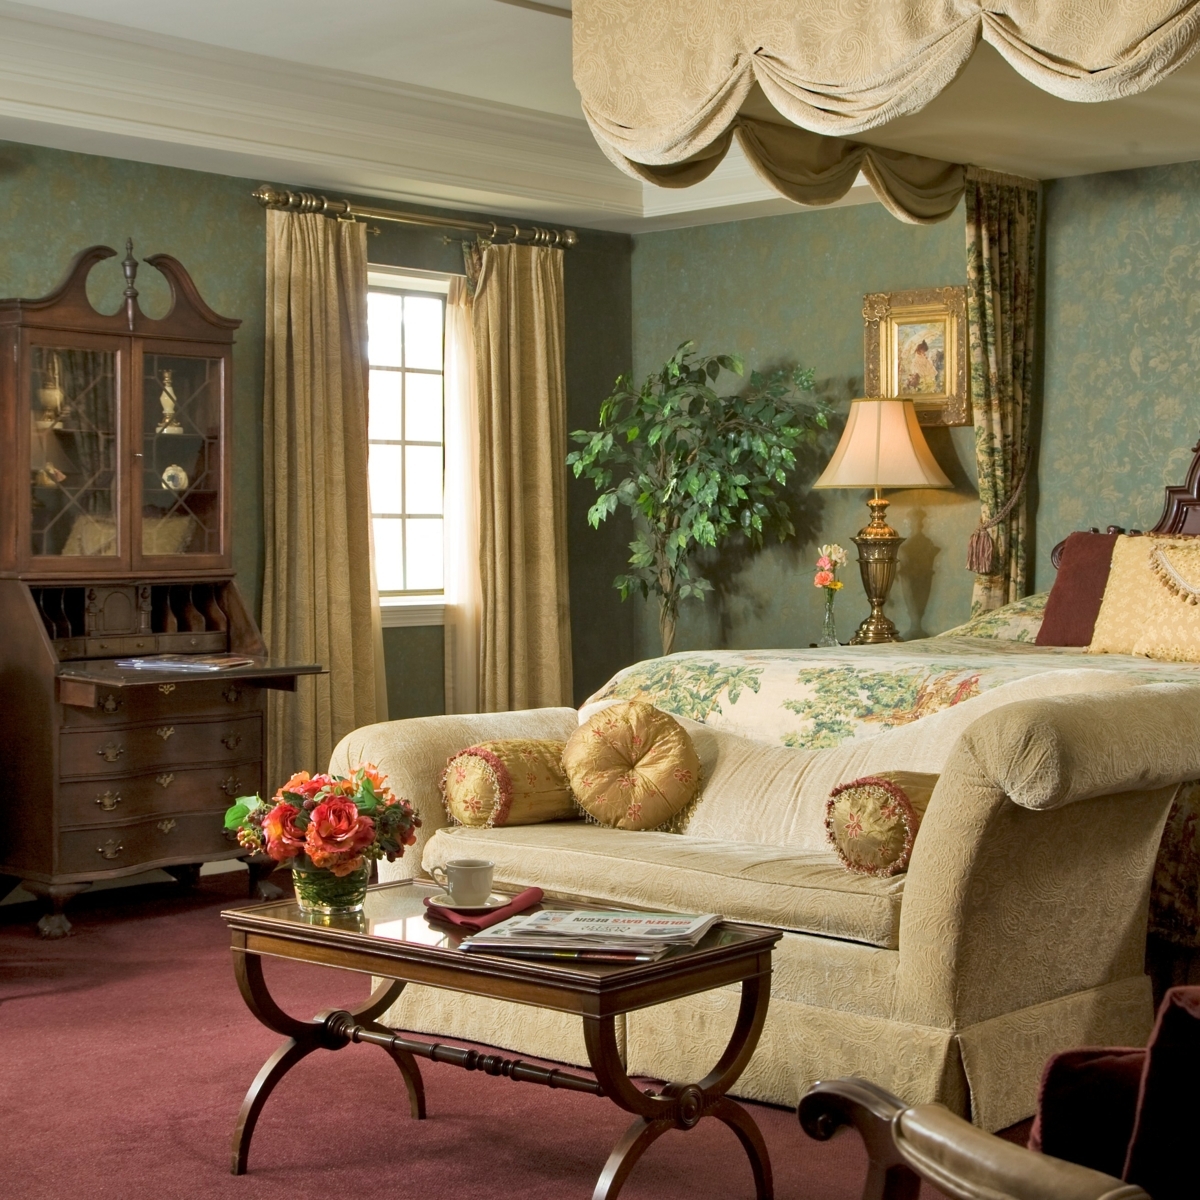 Transport yourself to the 1800s when you stay in our Sheffield Suite. The early #Victoriandecor and furnishings make for a unique experience when you visit #NiagaraFalls. Make this a memorable vacation and book with us today! bit.ly/3w82HU5